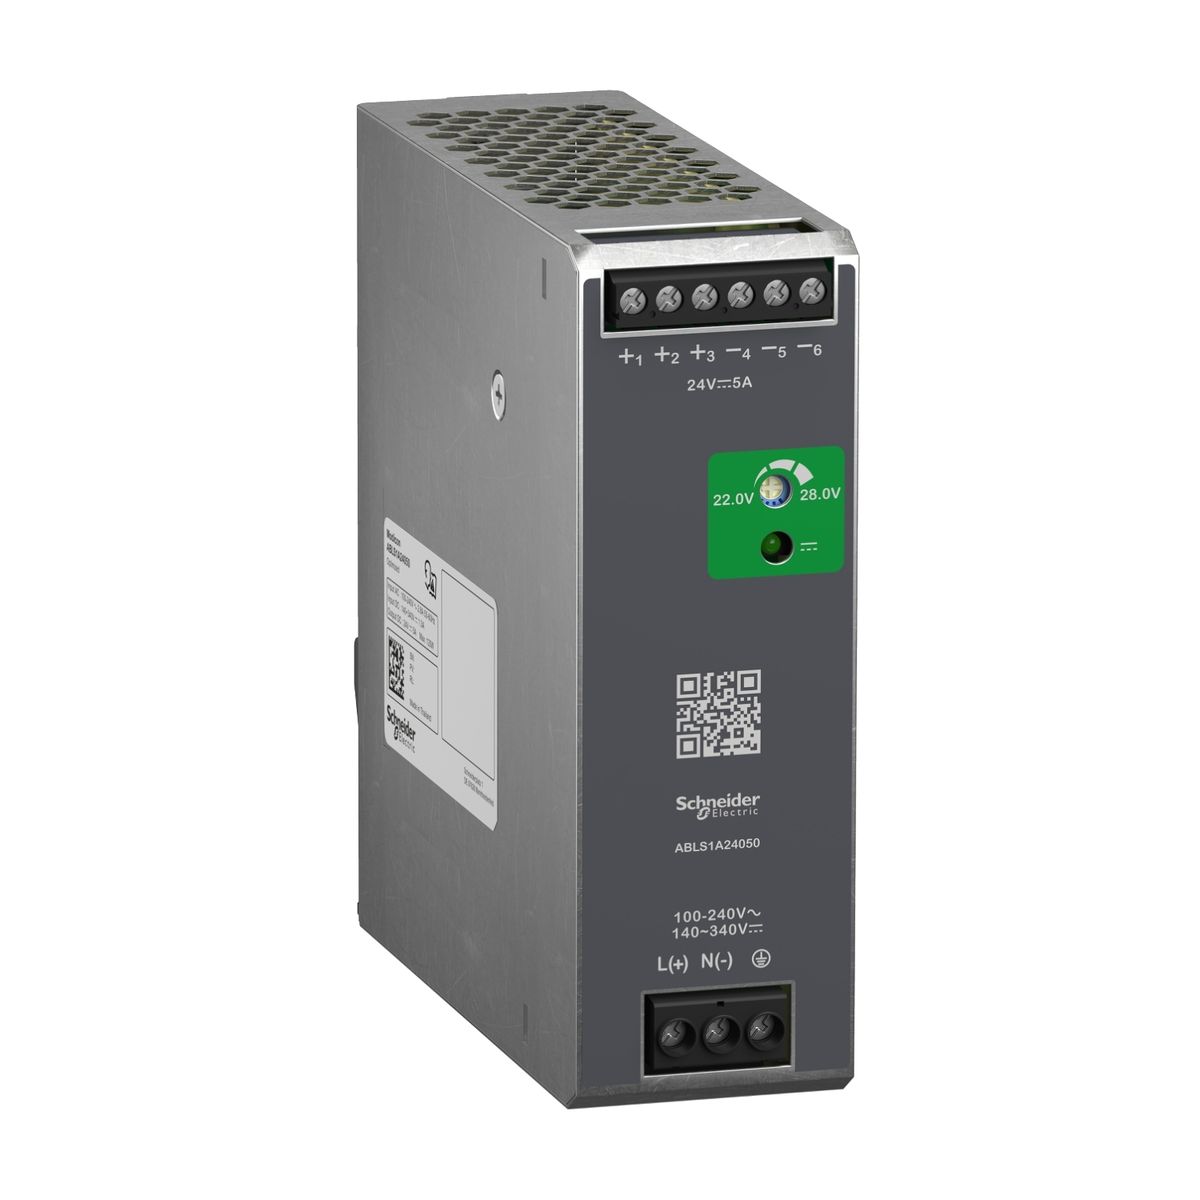 ABLS1A24050 - Modicon ABL - switching power supply - 5A - 100 to 240Vac single/two-phase - 24Vdc - Schneider Electric - 0